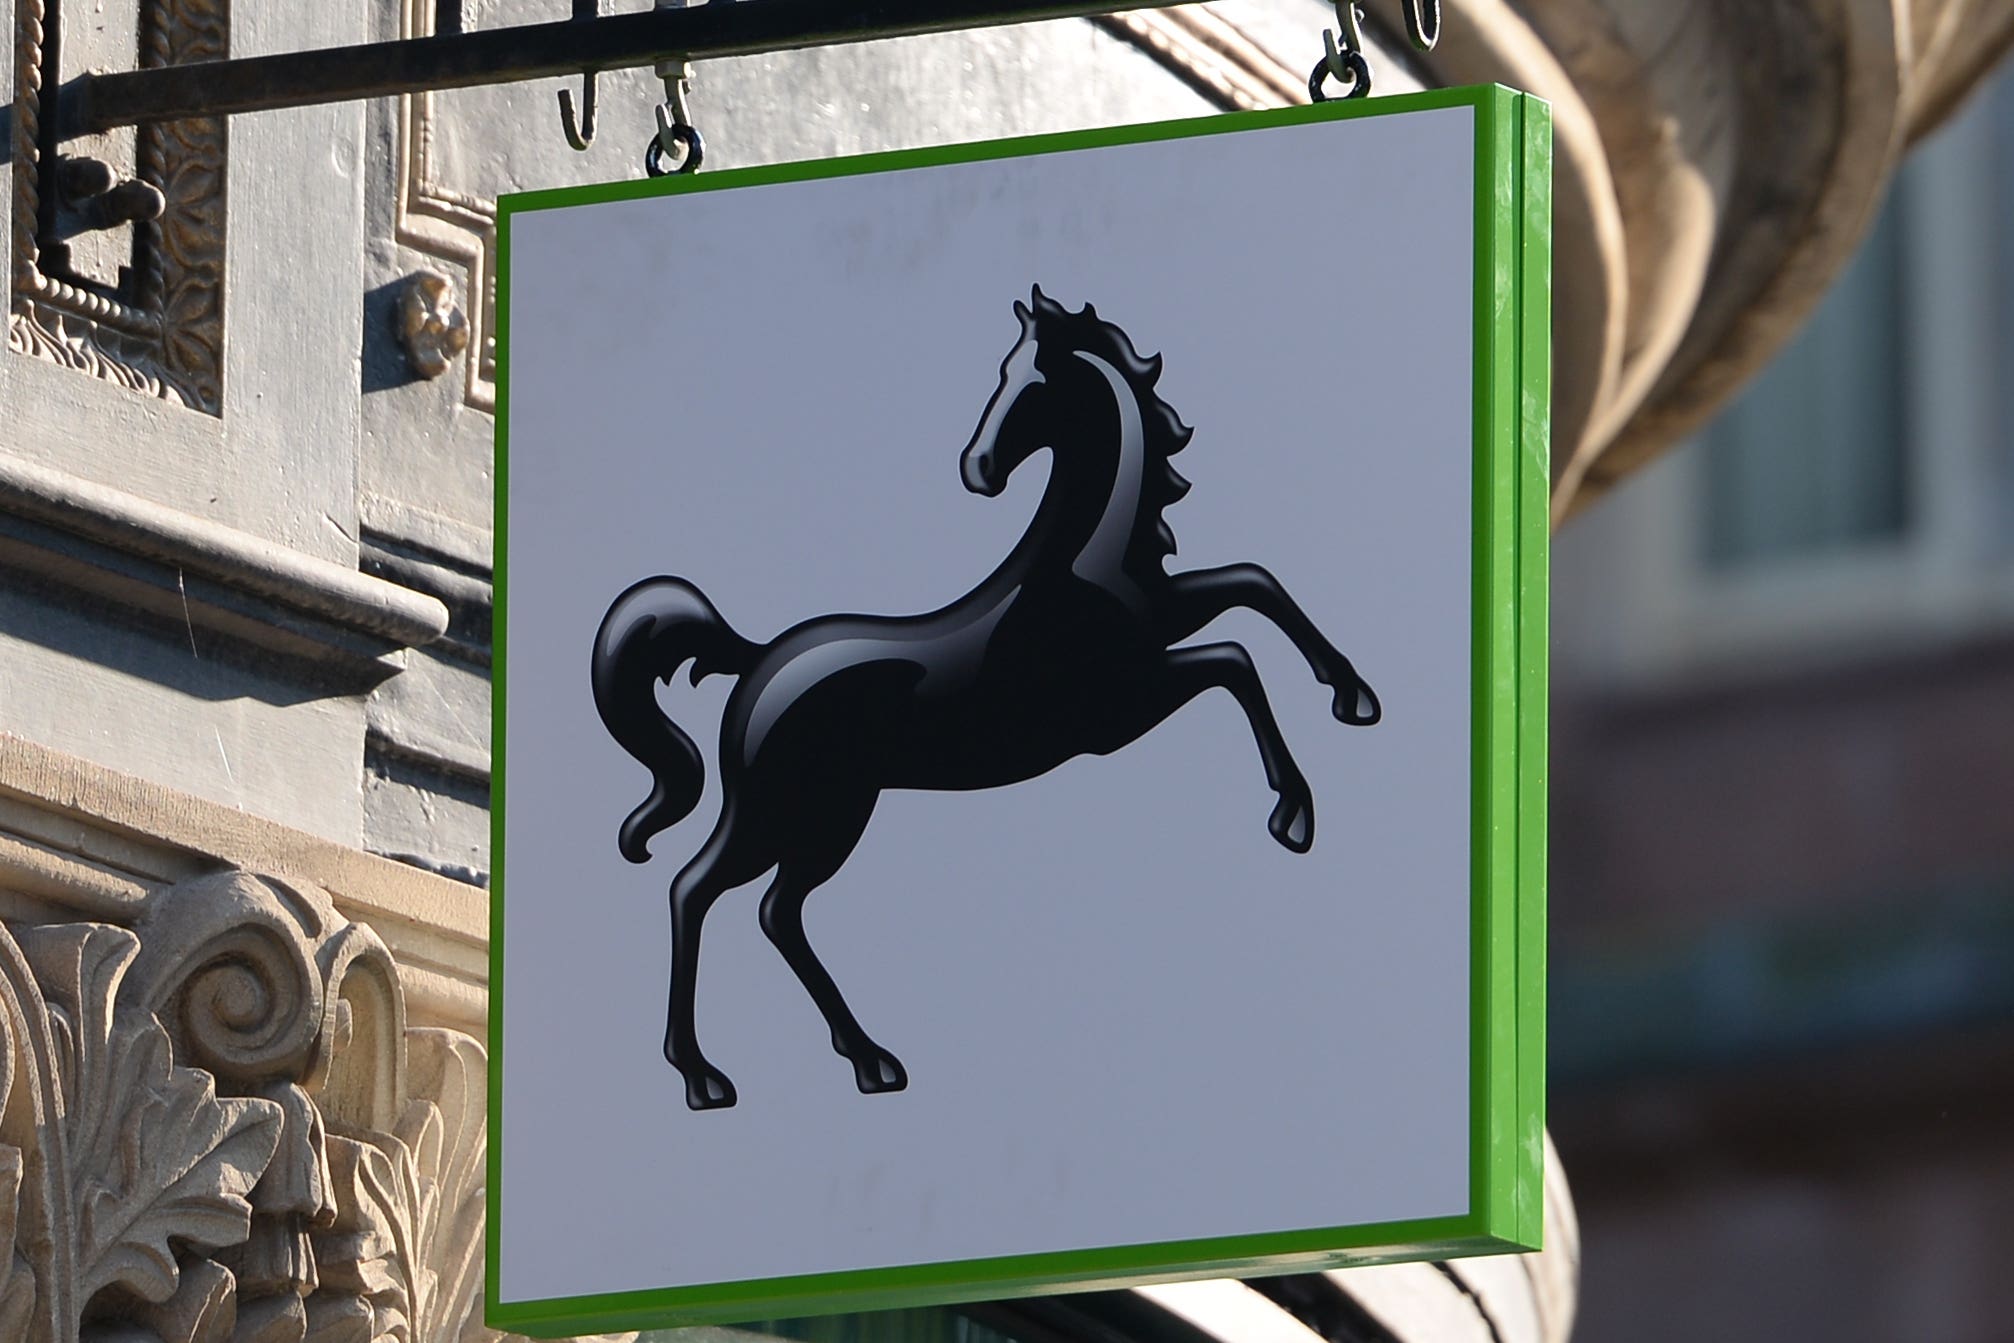 Lloyds Banking Group has pledged to double the proportion of staff with disabilities in senior management jobs, in the first commitment of its kind from a UK bank (Joe Giddens/ PA)